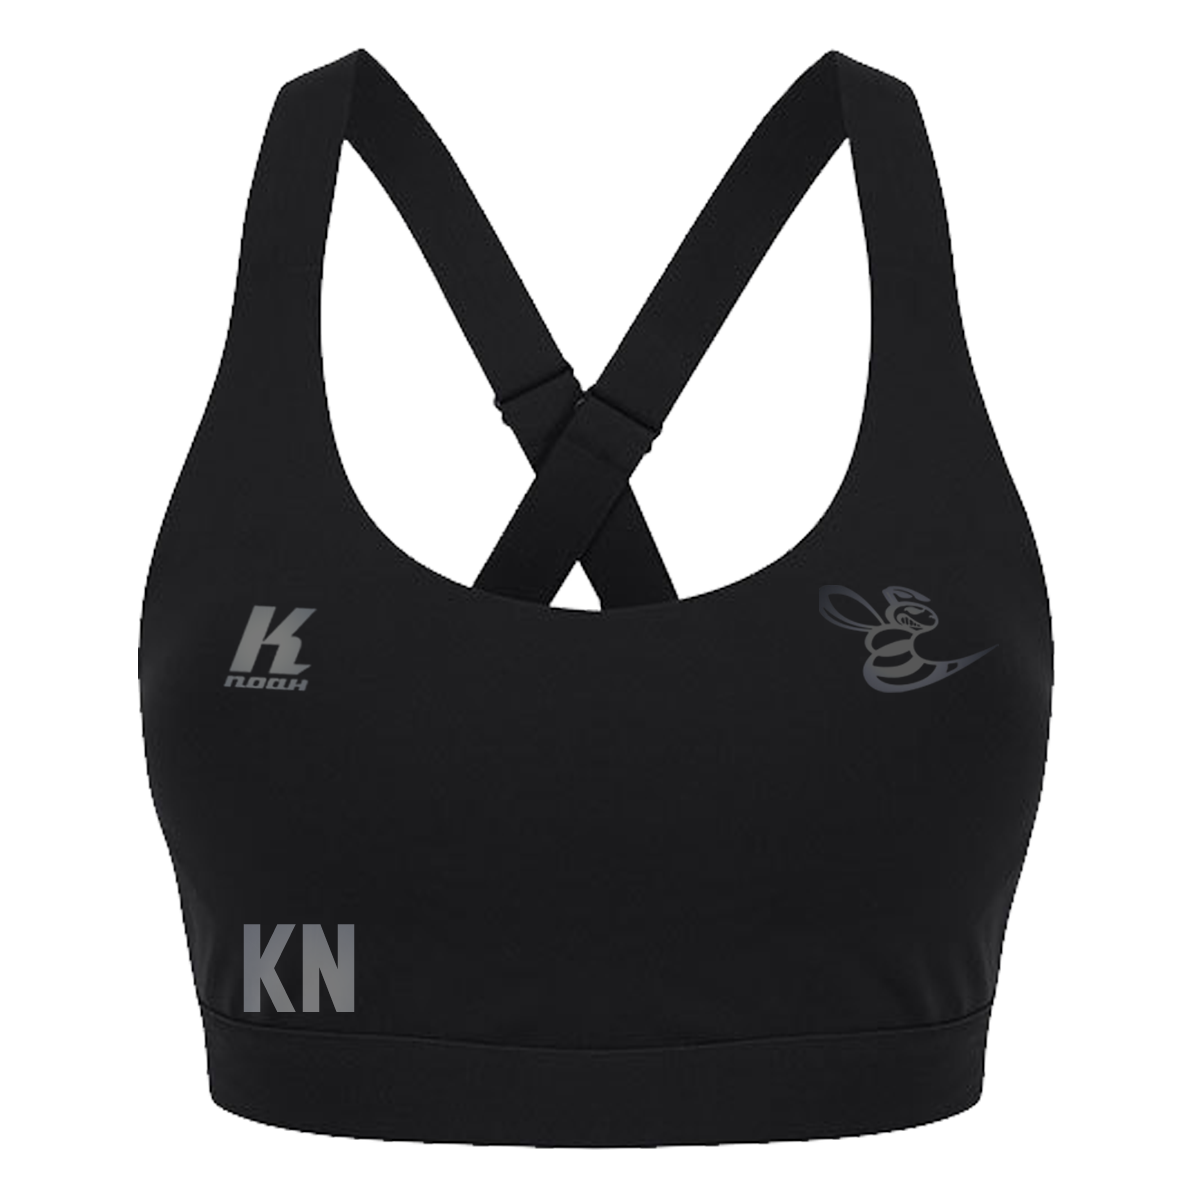 Hornets "Blackline" Womens Impact Core Bra TL371 with Initials/Playernumber